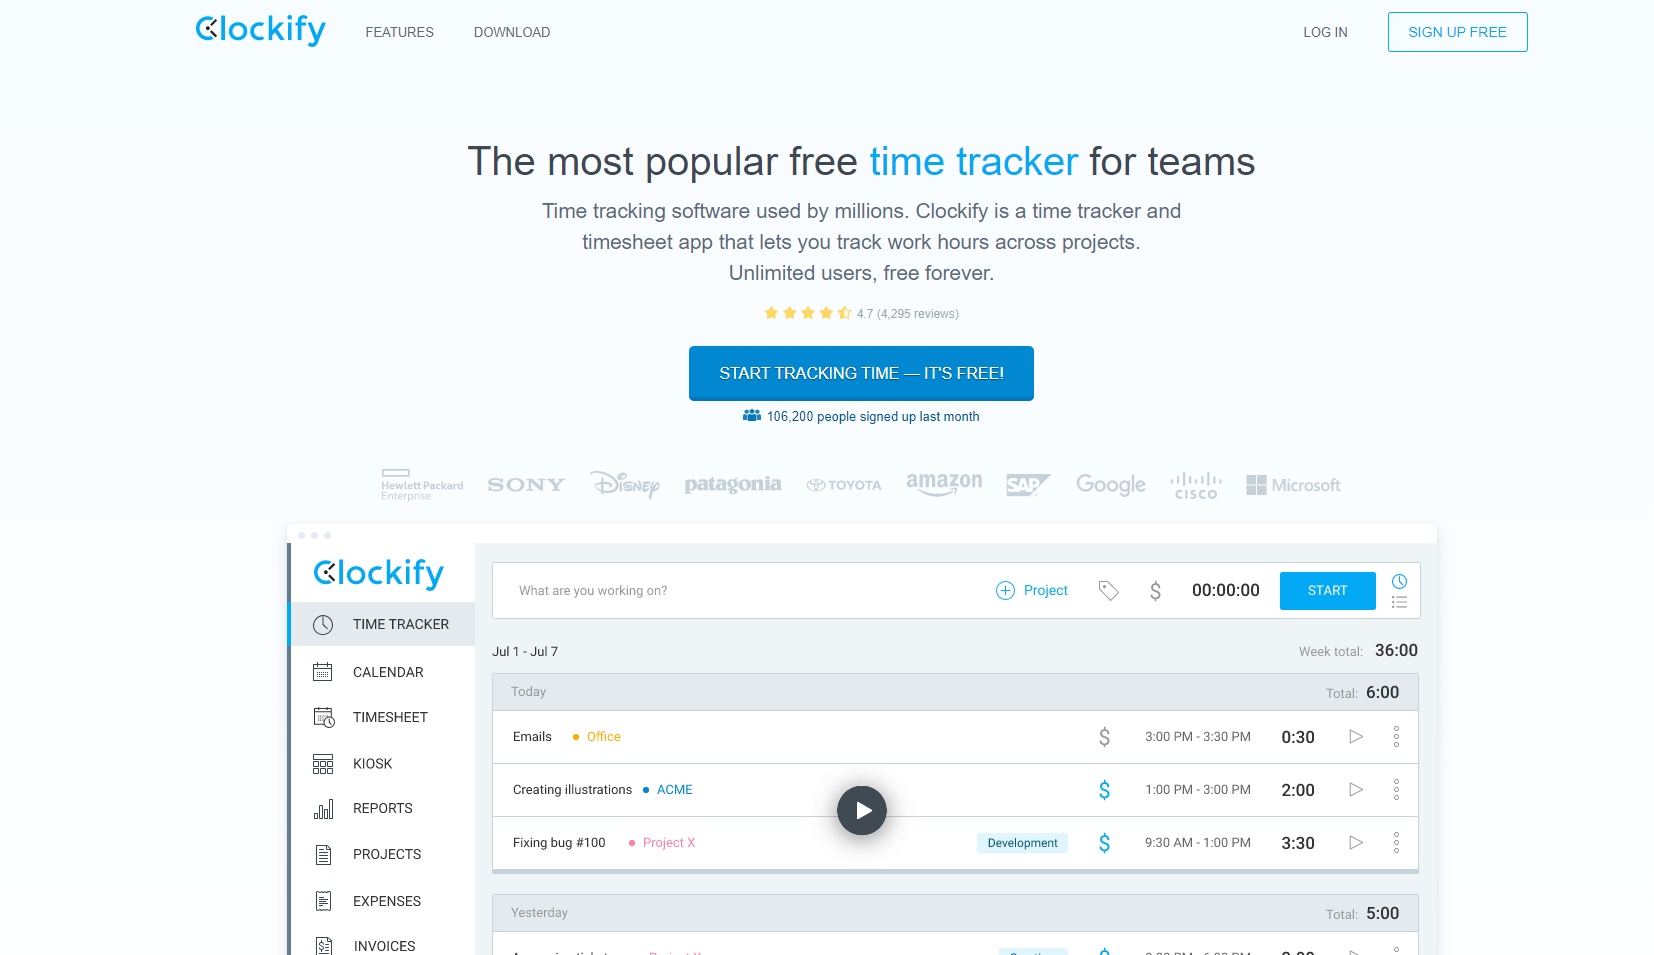 Homepage of Clockify, showing a glimpse of it's dashboard, with a play icon for video